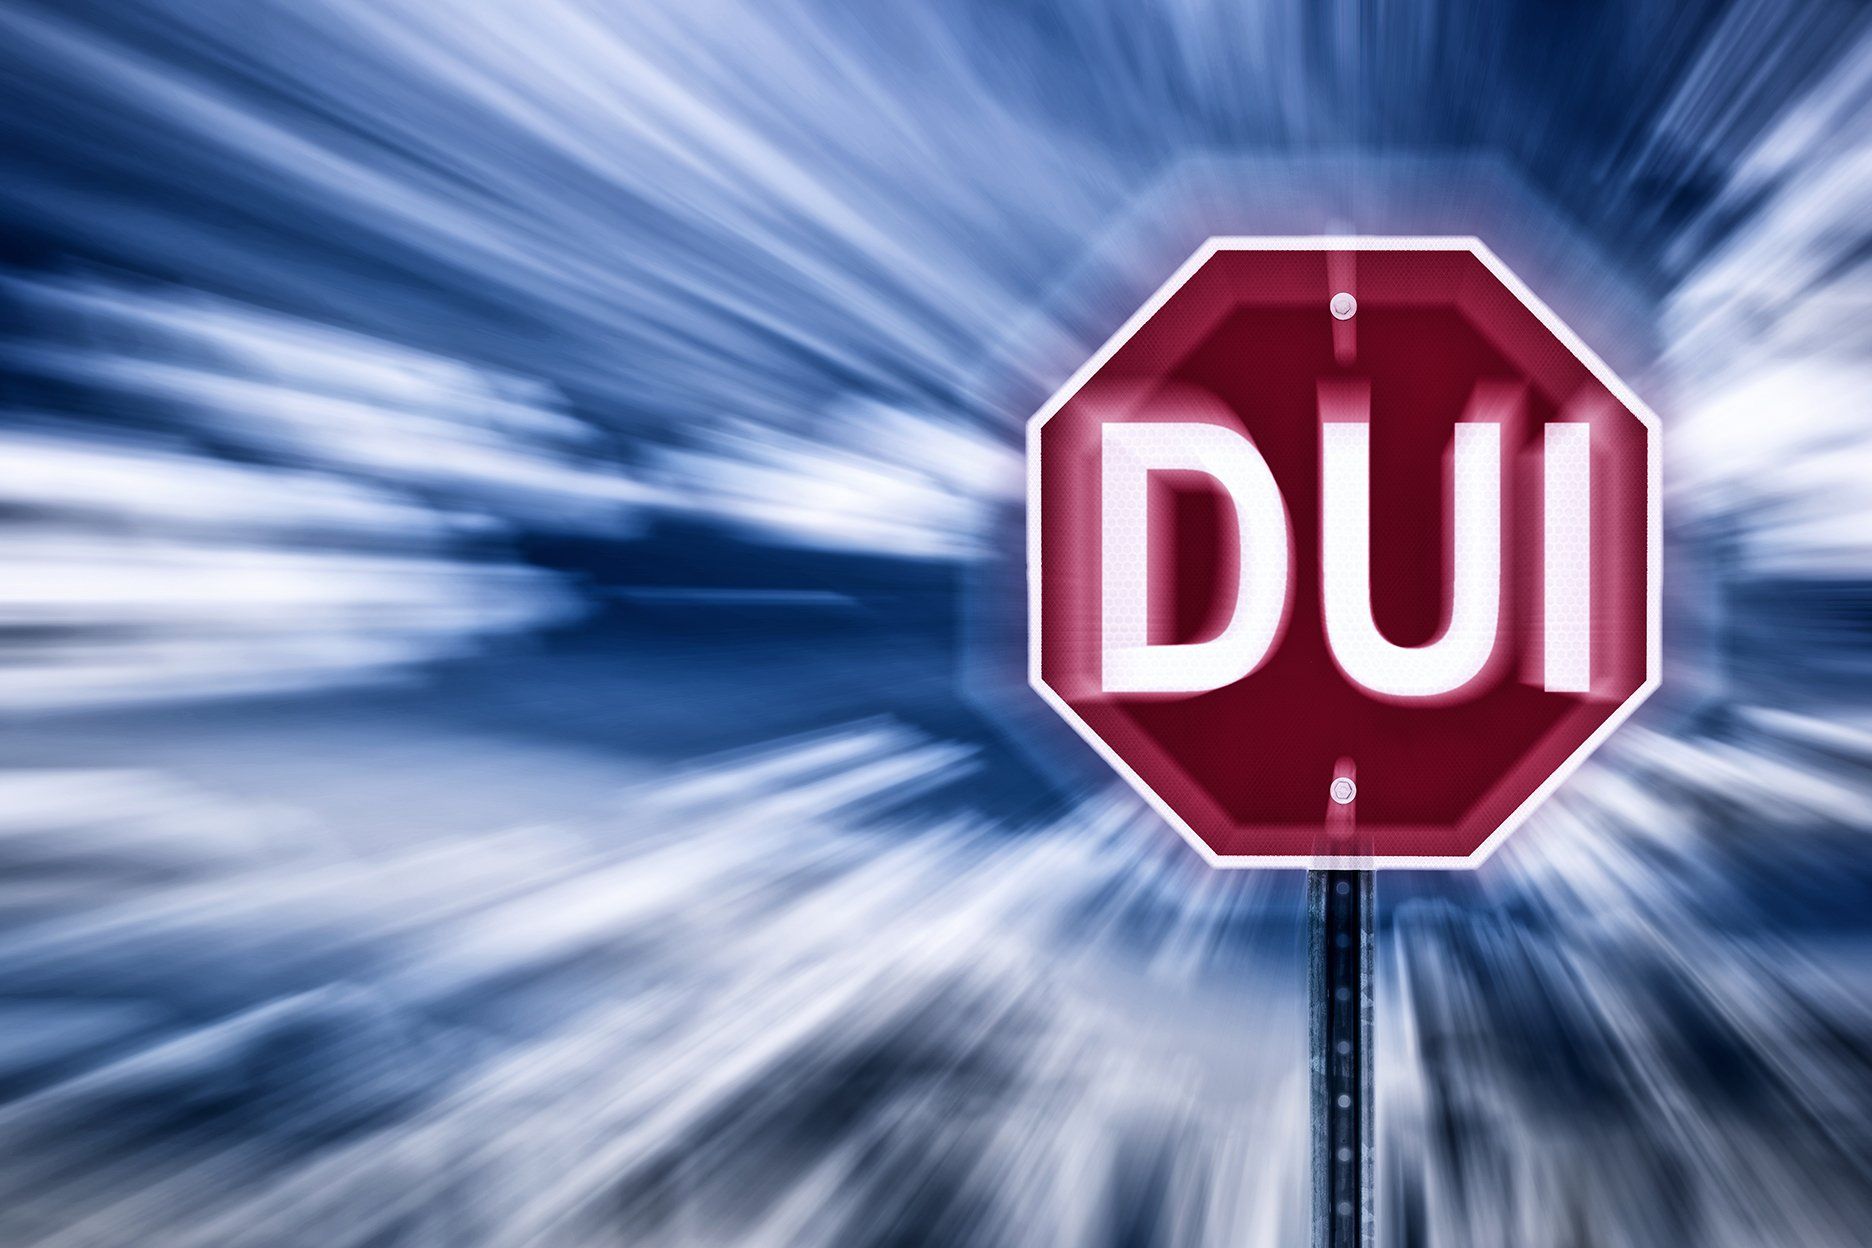 I Got a DUI: Now What?